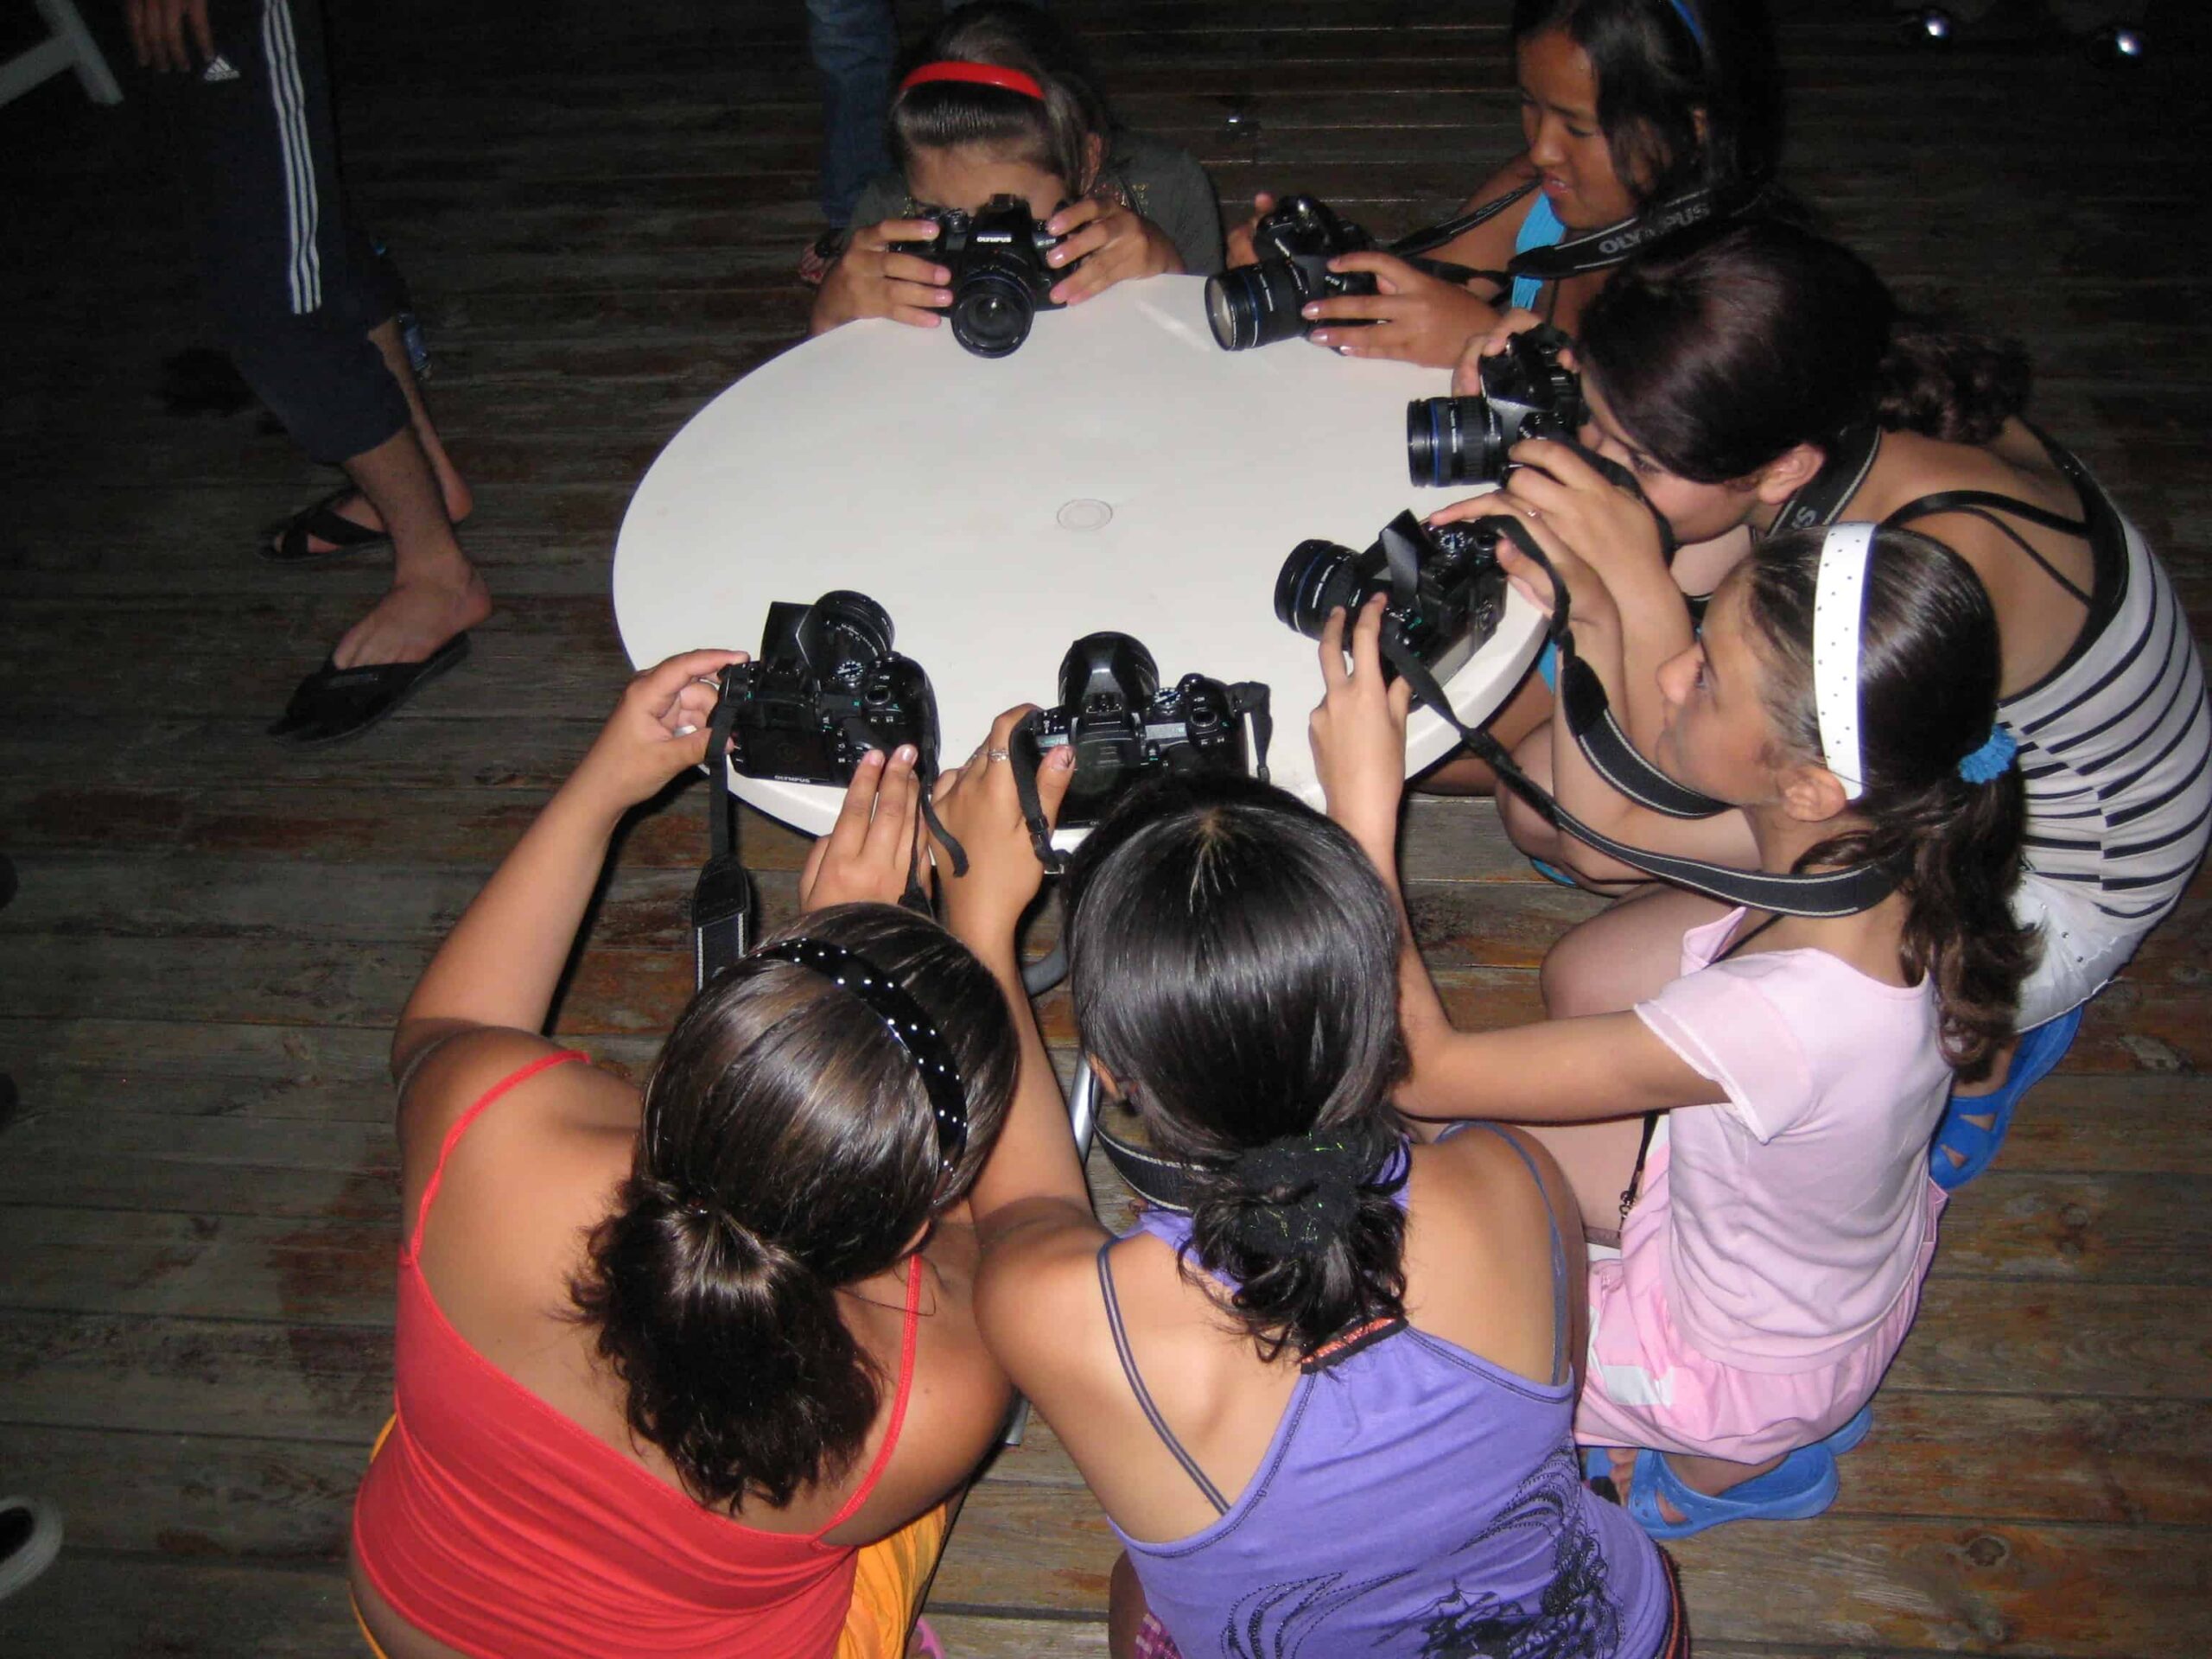 Young women around a table photograph each other.